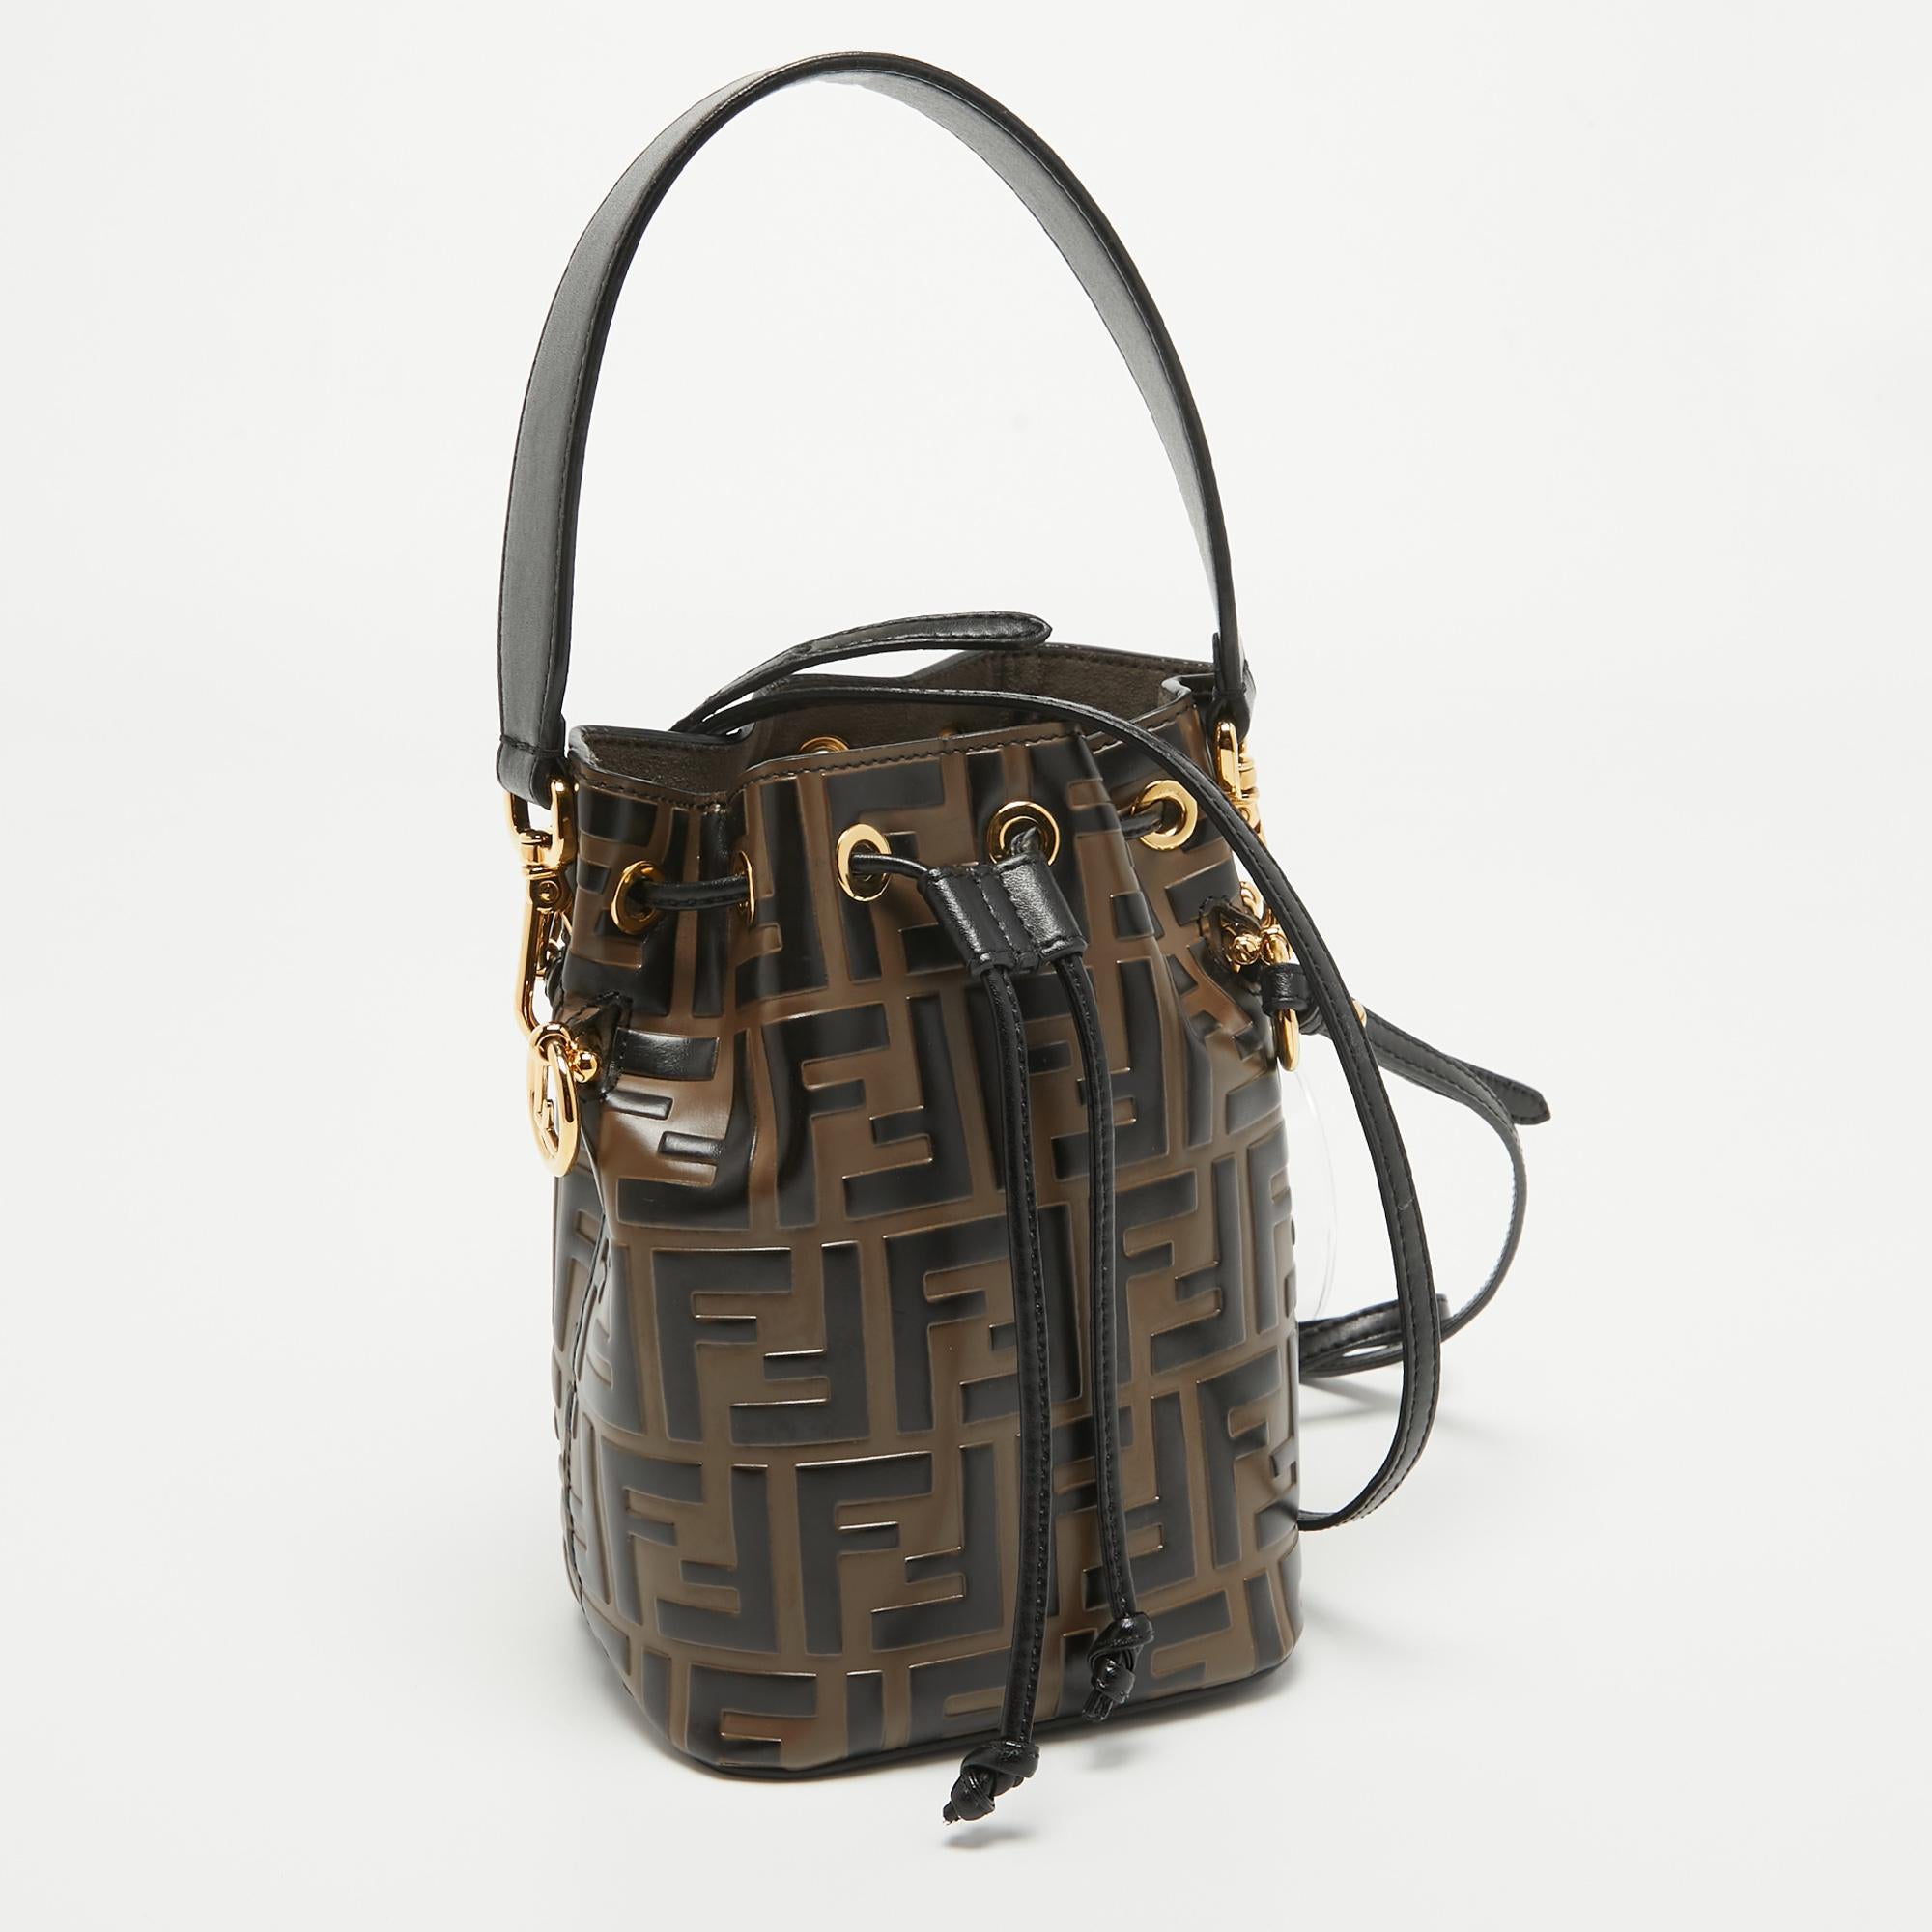 From the House of Fendi, this mini Mon Tresor bucket bag will offer you a luxe design and ease. It is made from brown-black Zucca leather on the exterior and comes with gold-toned hardware, a drawstring detail, and a single top handle. This bag is